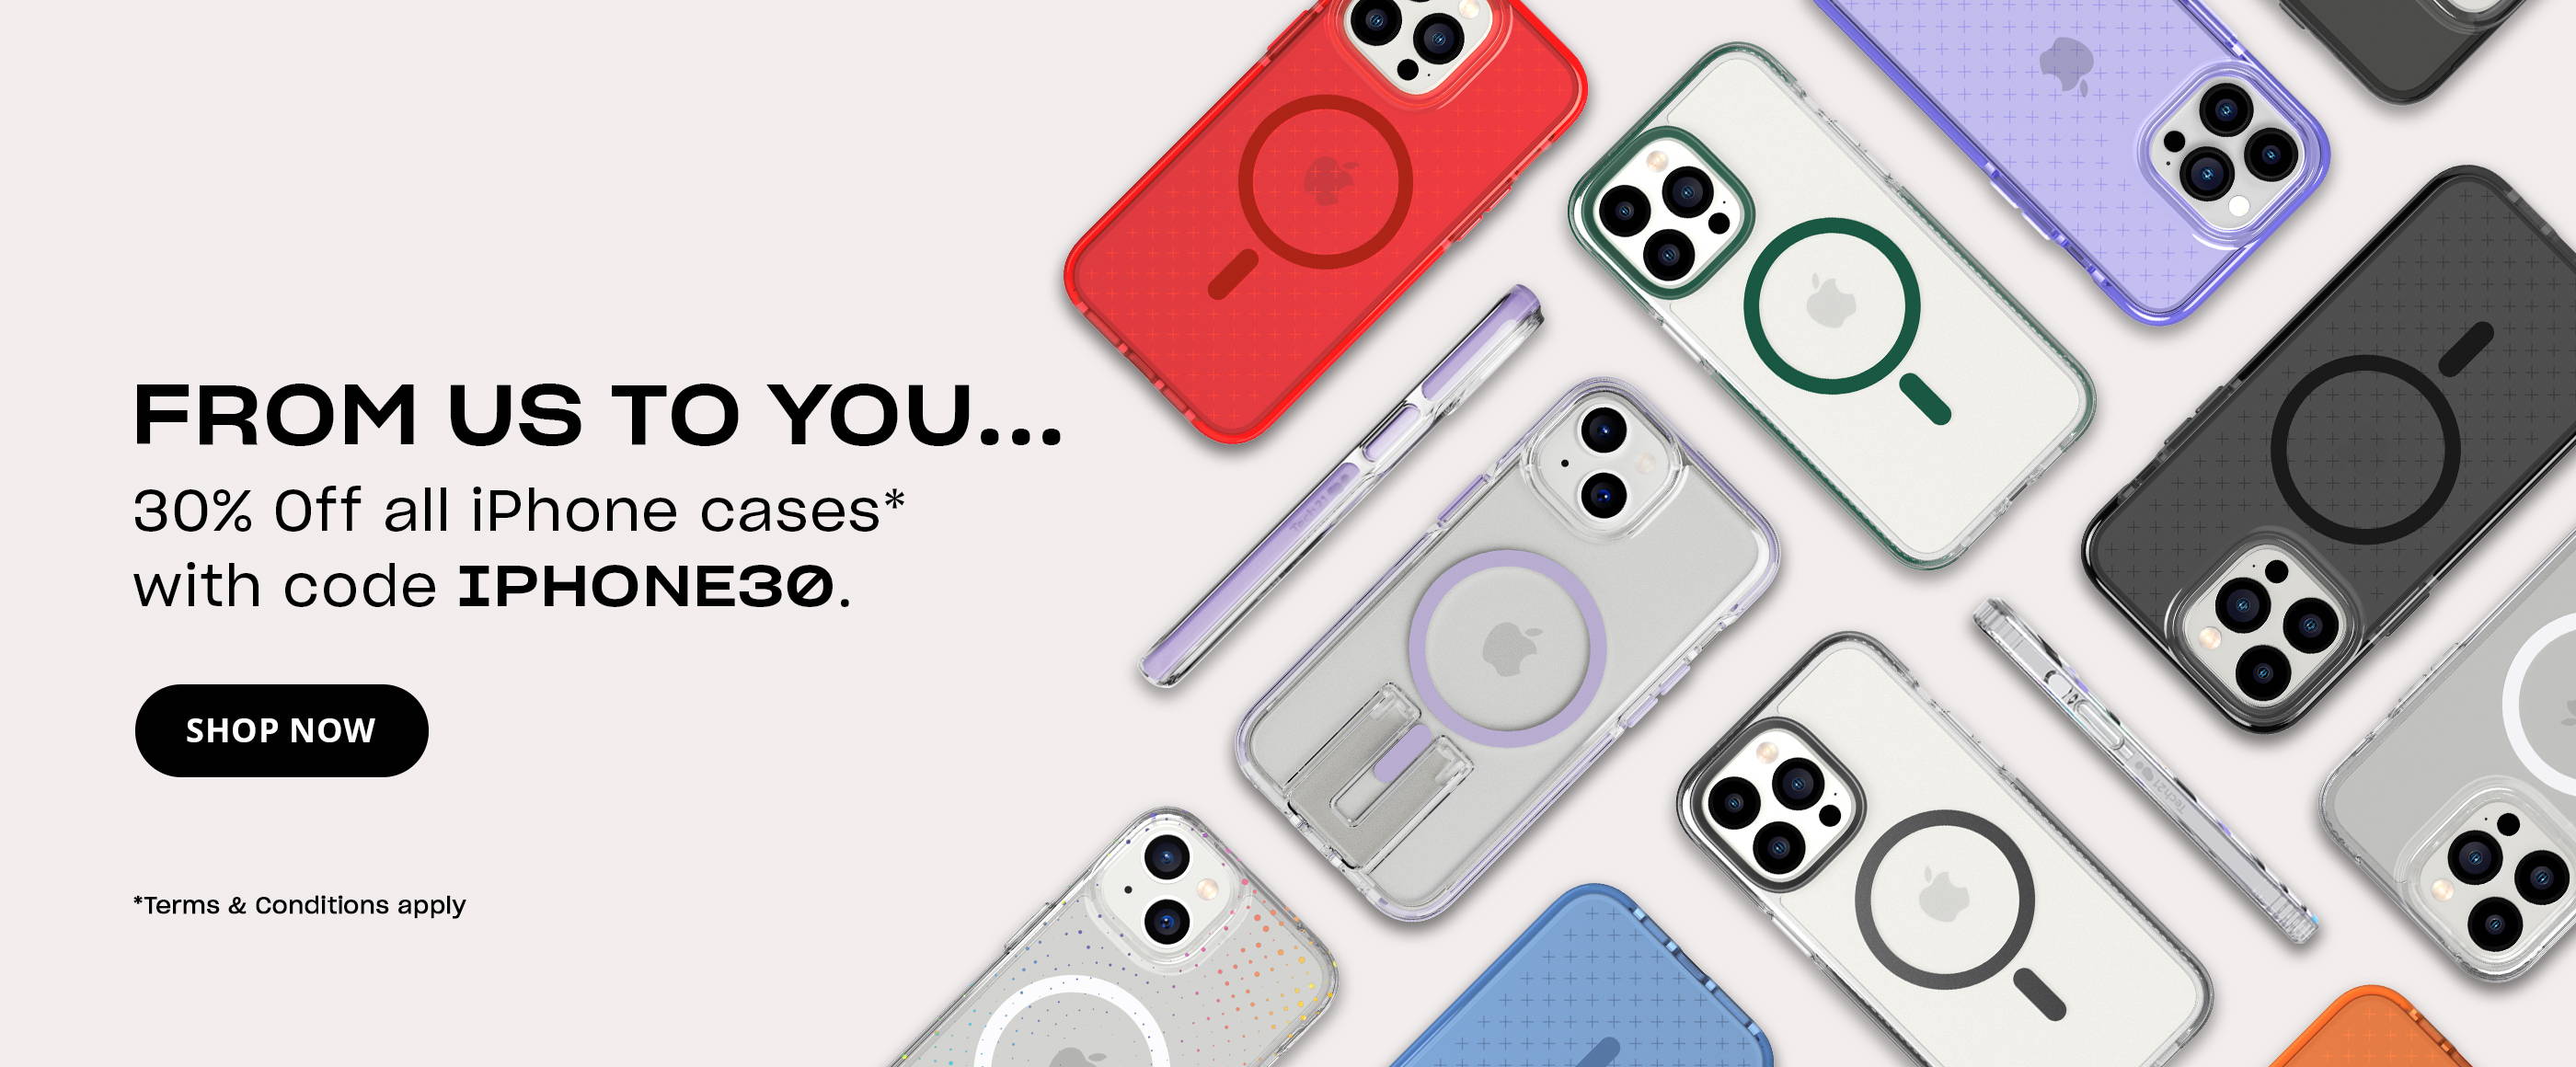 30% off all full priced iPhone cases